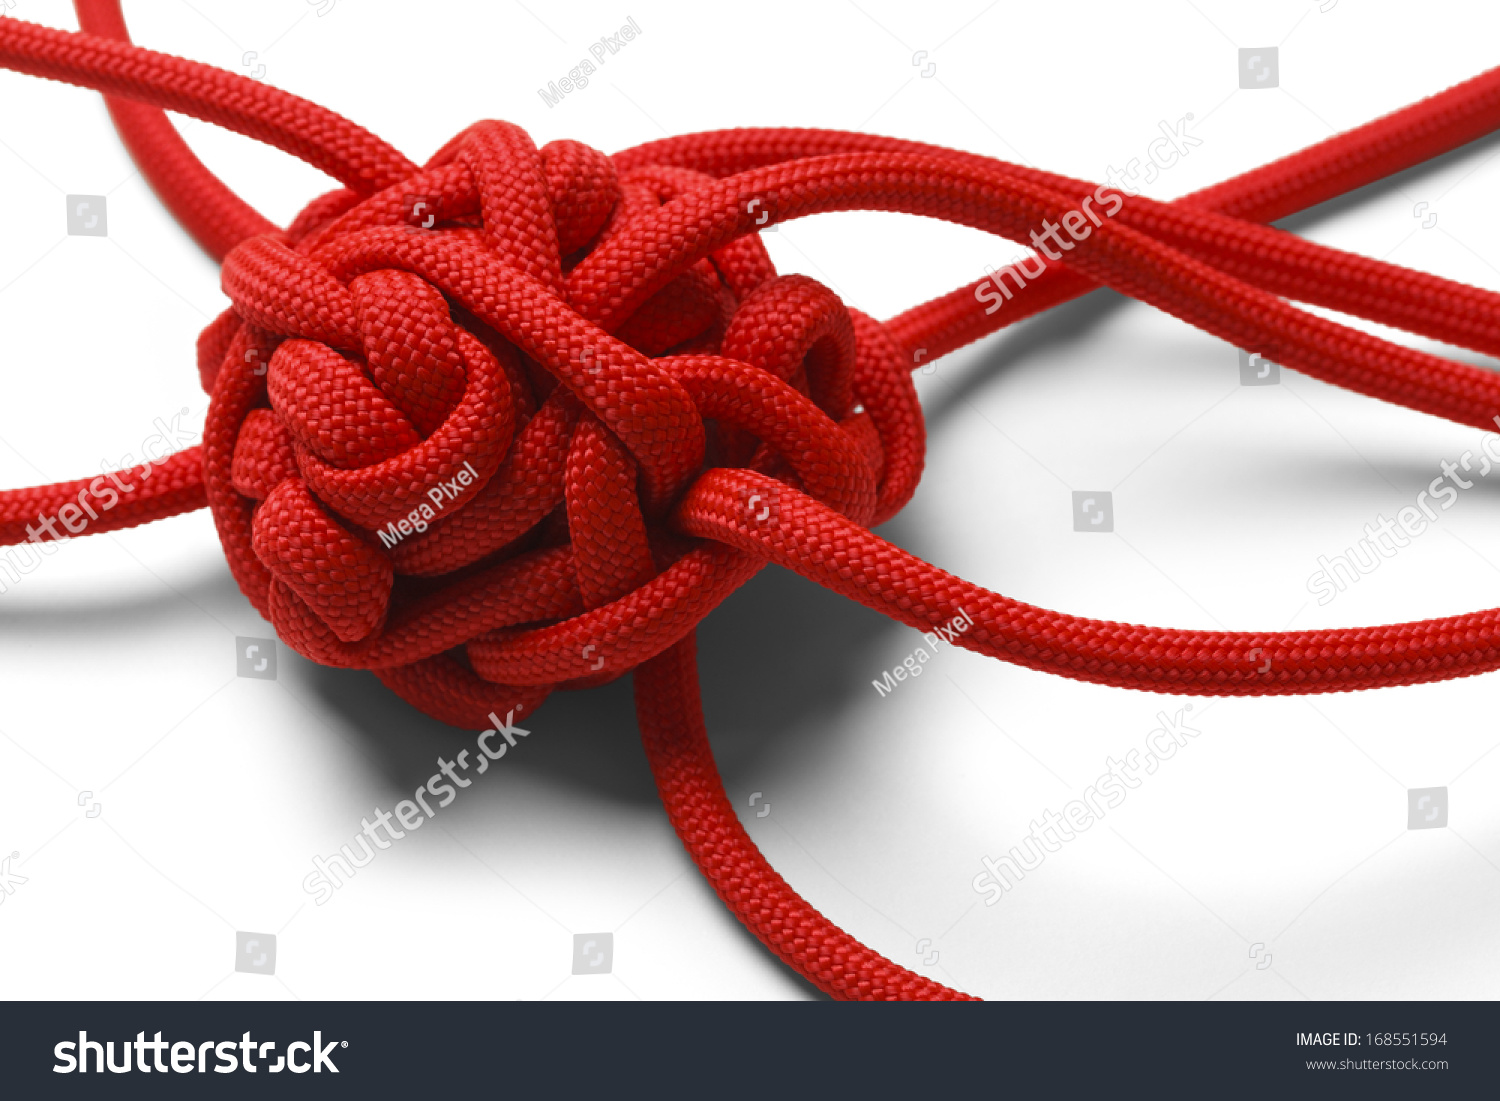 Red Rope in A Tangled Mess Isolated on White Background. #168551594